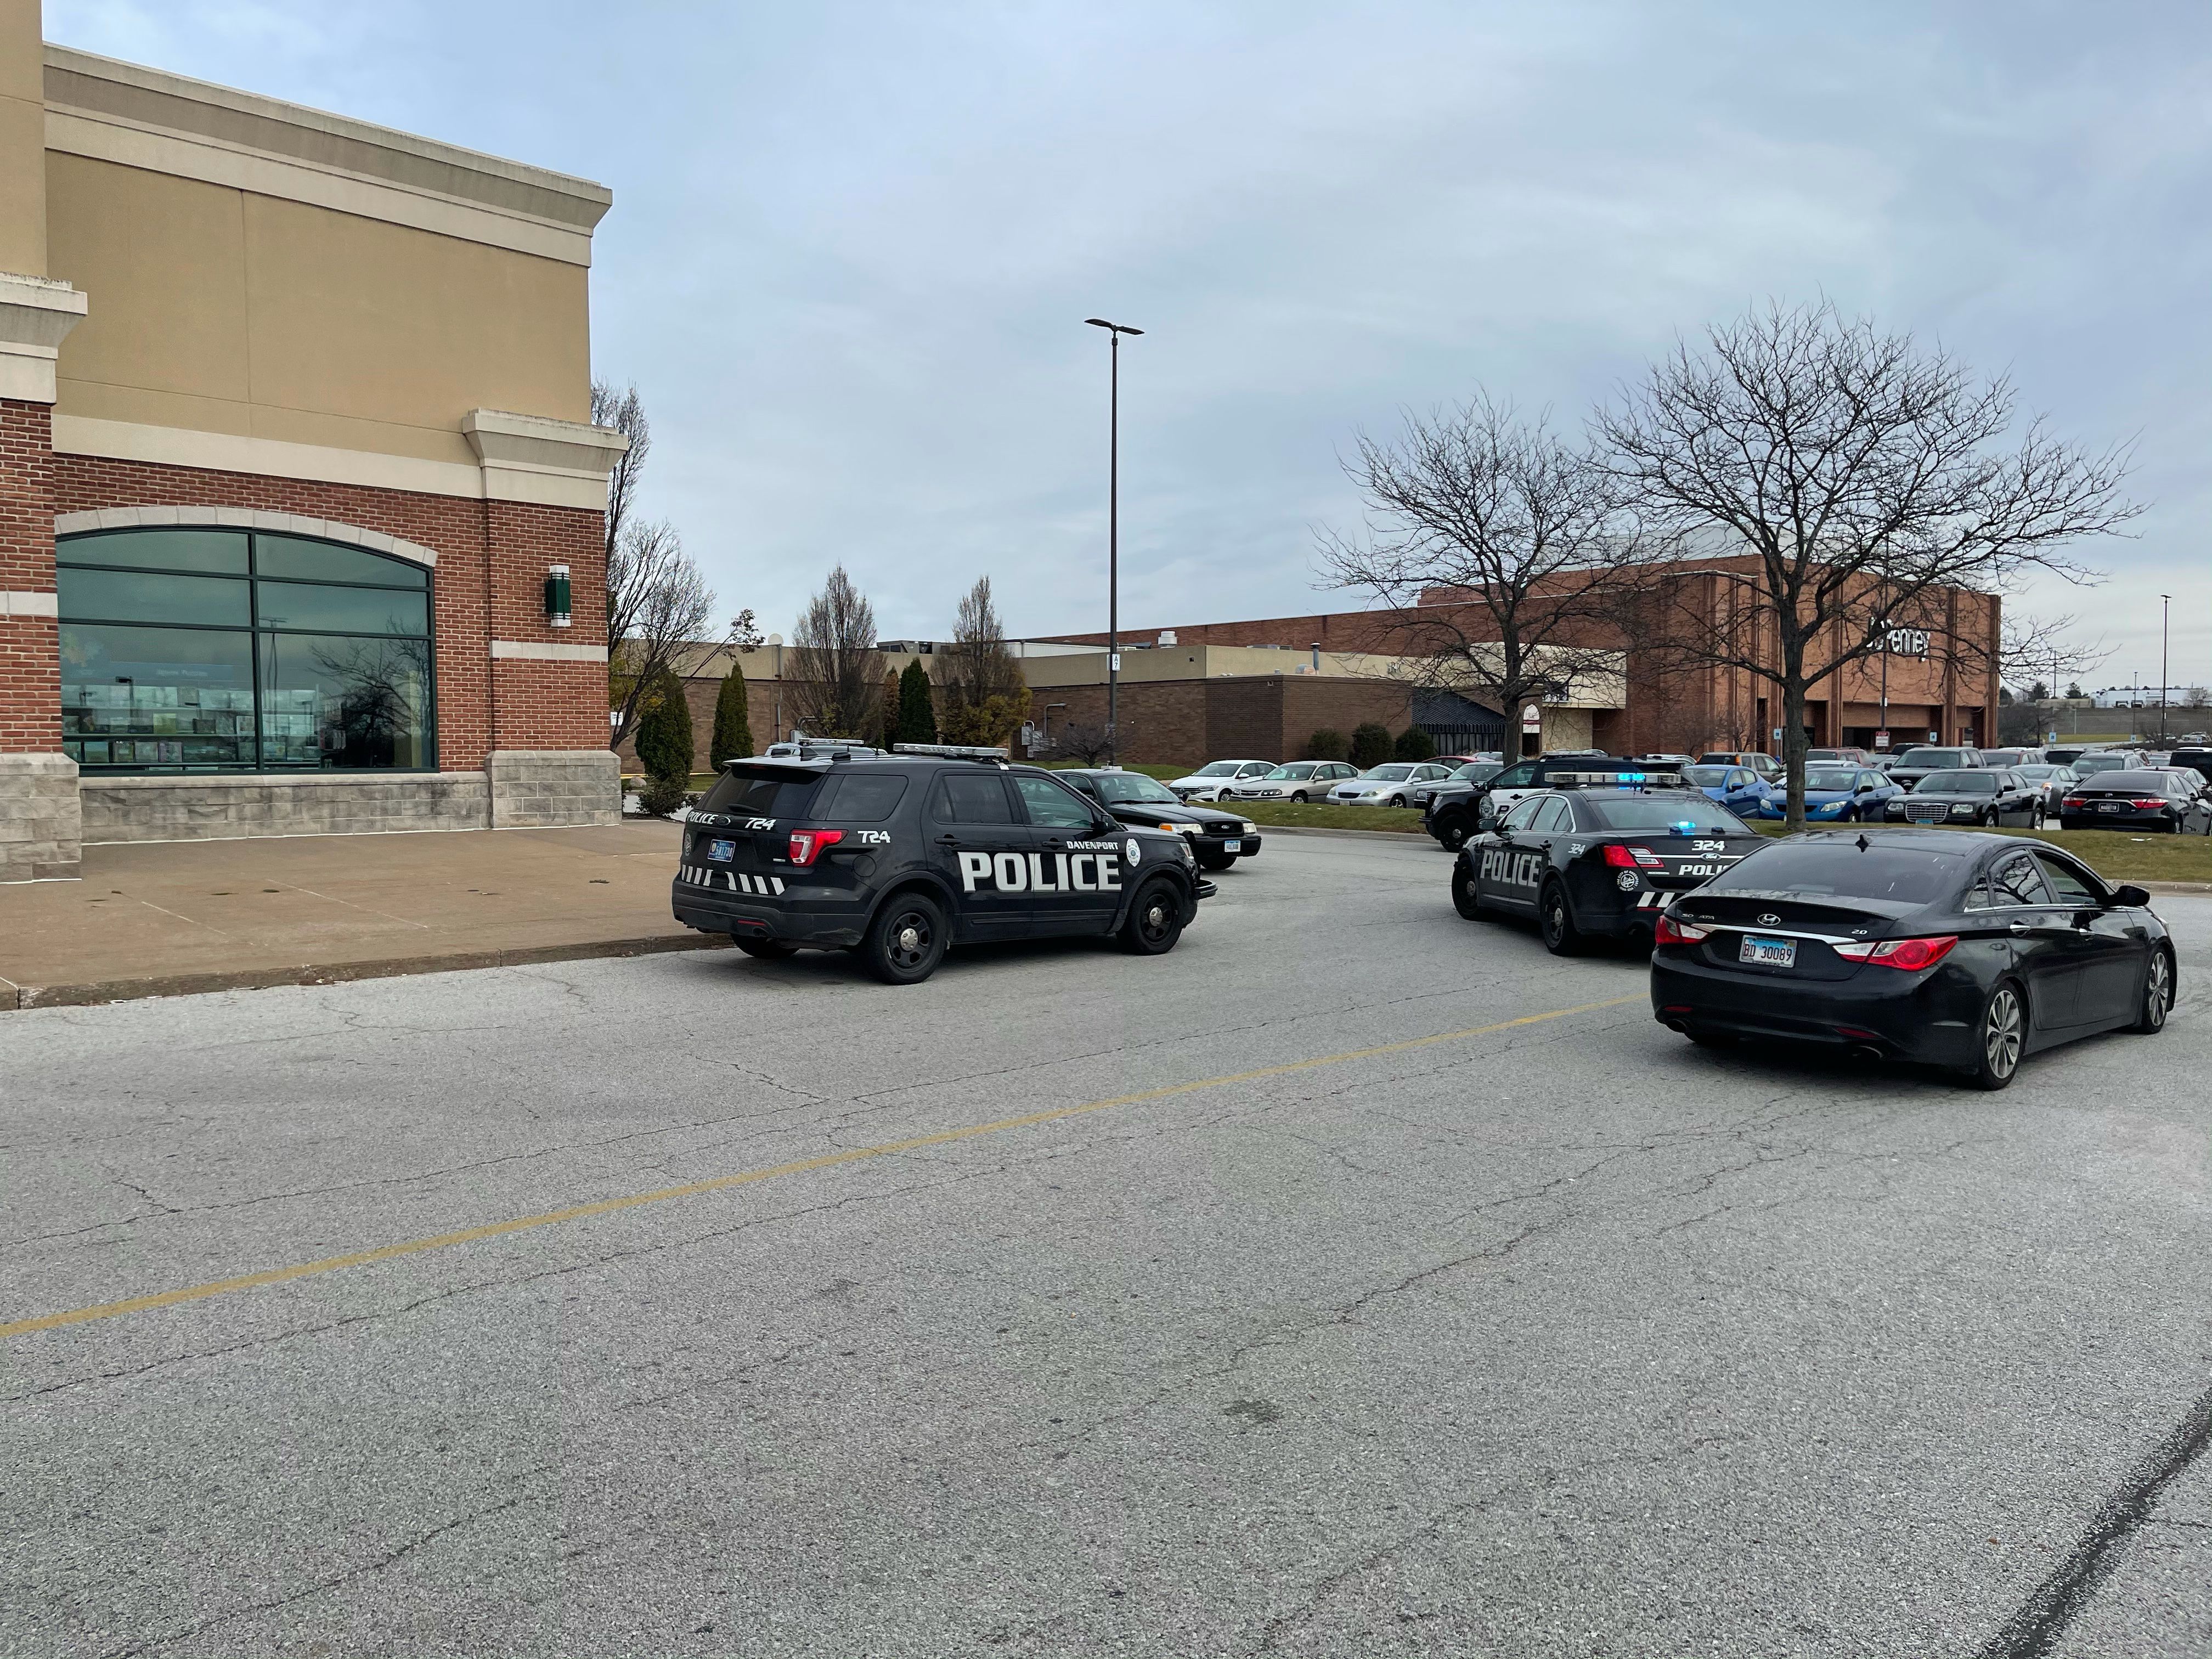 NorthPark Mall gunfire: store reaction, safety tips from police